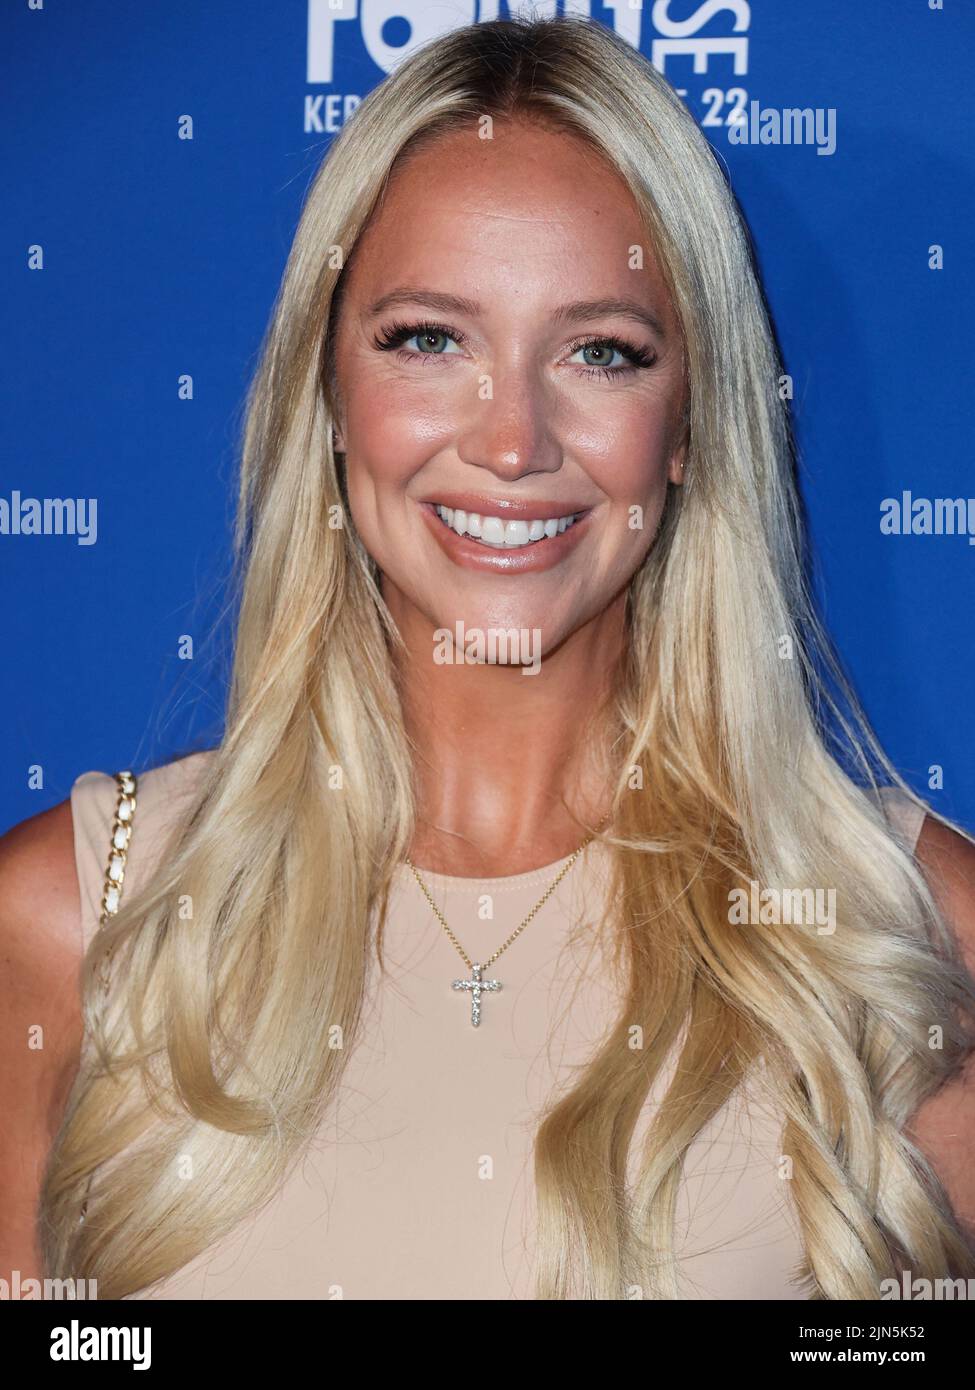 Los Angeles, United States. 08th Aug, 2022. ELYSIAN PARK, LOS ANGELES, CALIFORNIA, USA - AUGUST 08: American sports anchor/reporter Ashley Brewer arrives at Kershaw's Challenge Ping Pong 4 Purpose 2022 held at Dodger Stadium on August 8, 2022 in Elysian Park, Los Angeles, California, United States. (Photo by Xavier Collin/Image Press Agency) Credit: Image Press Agency/Alamy Live News Stock Photo